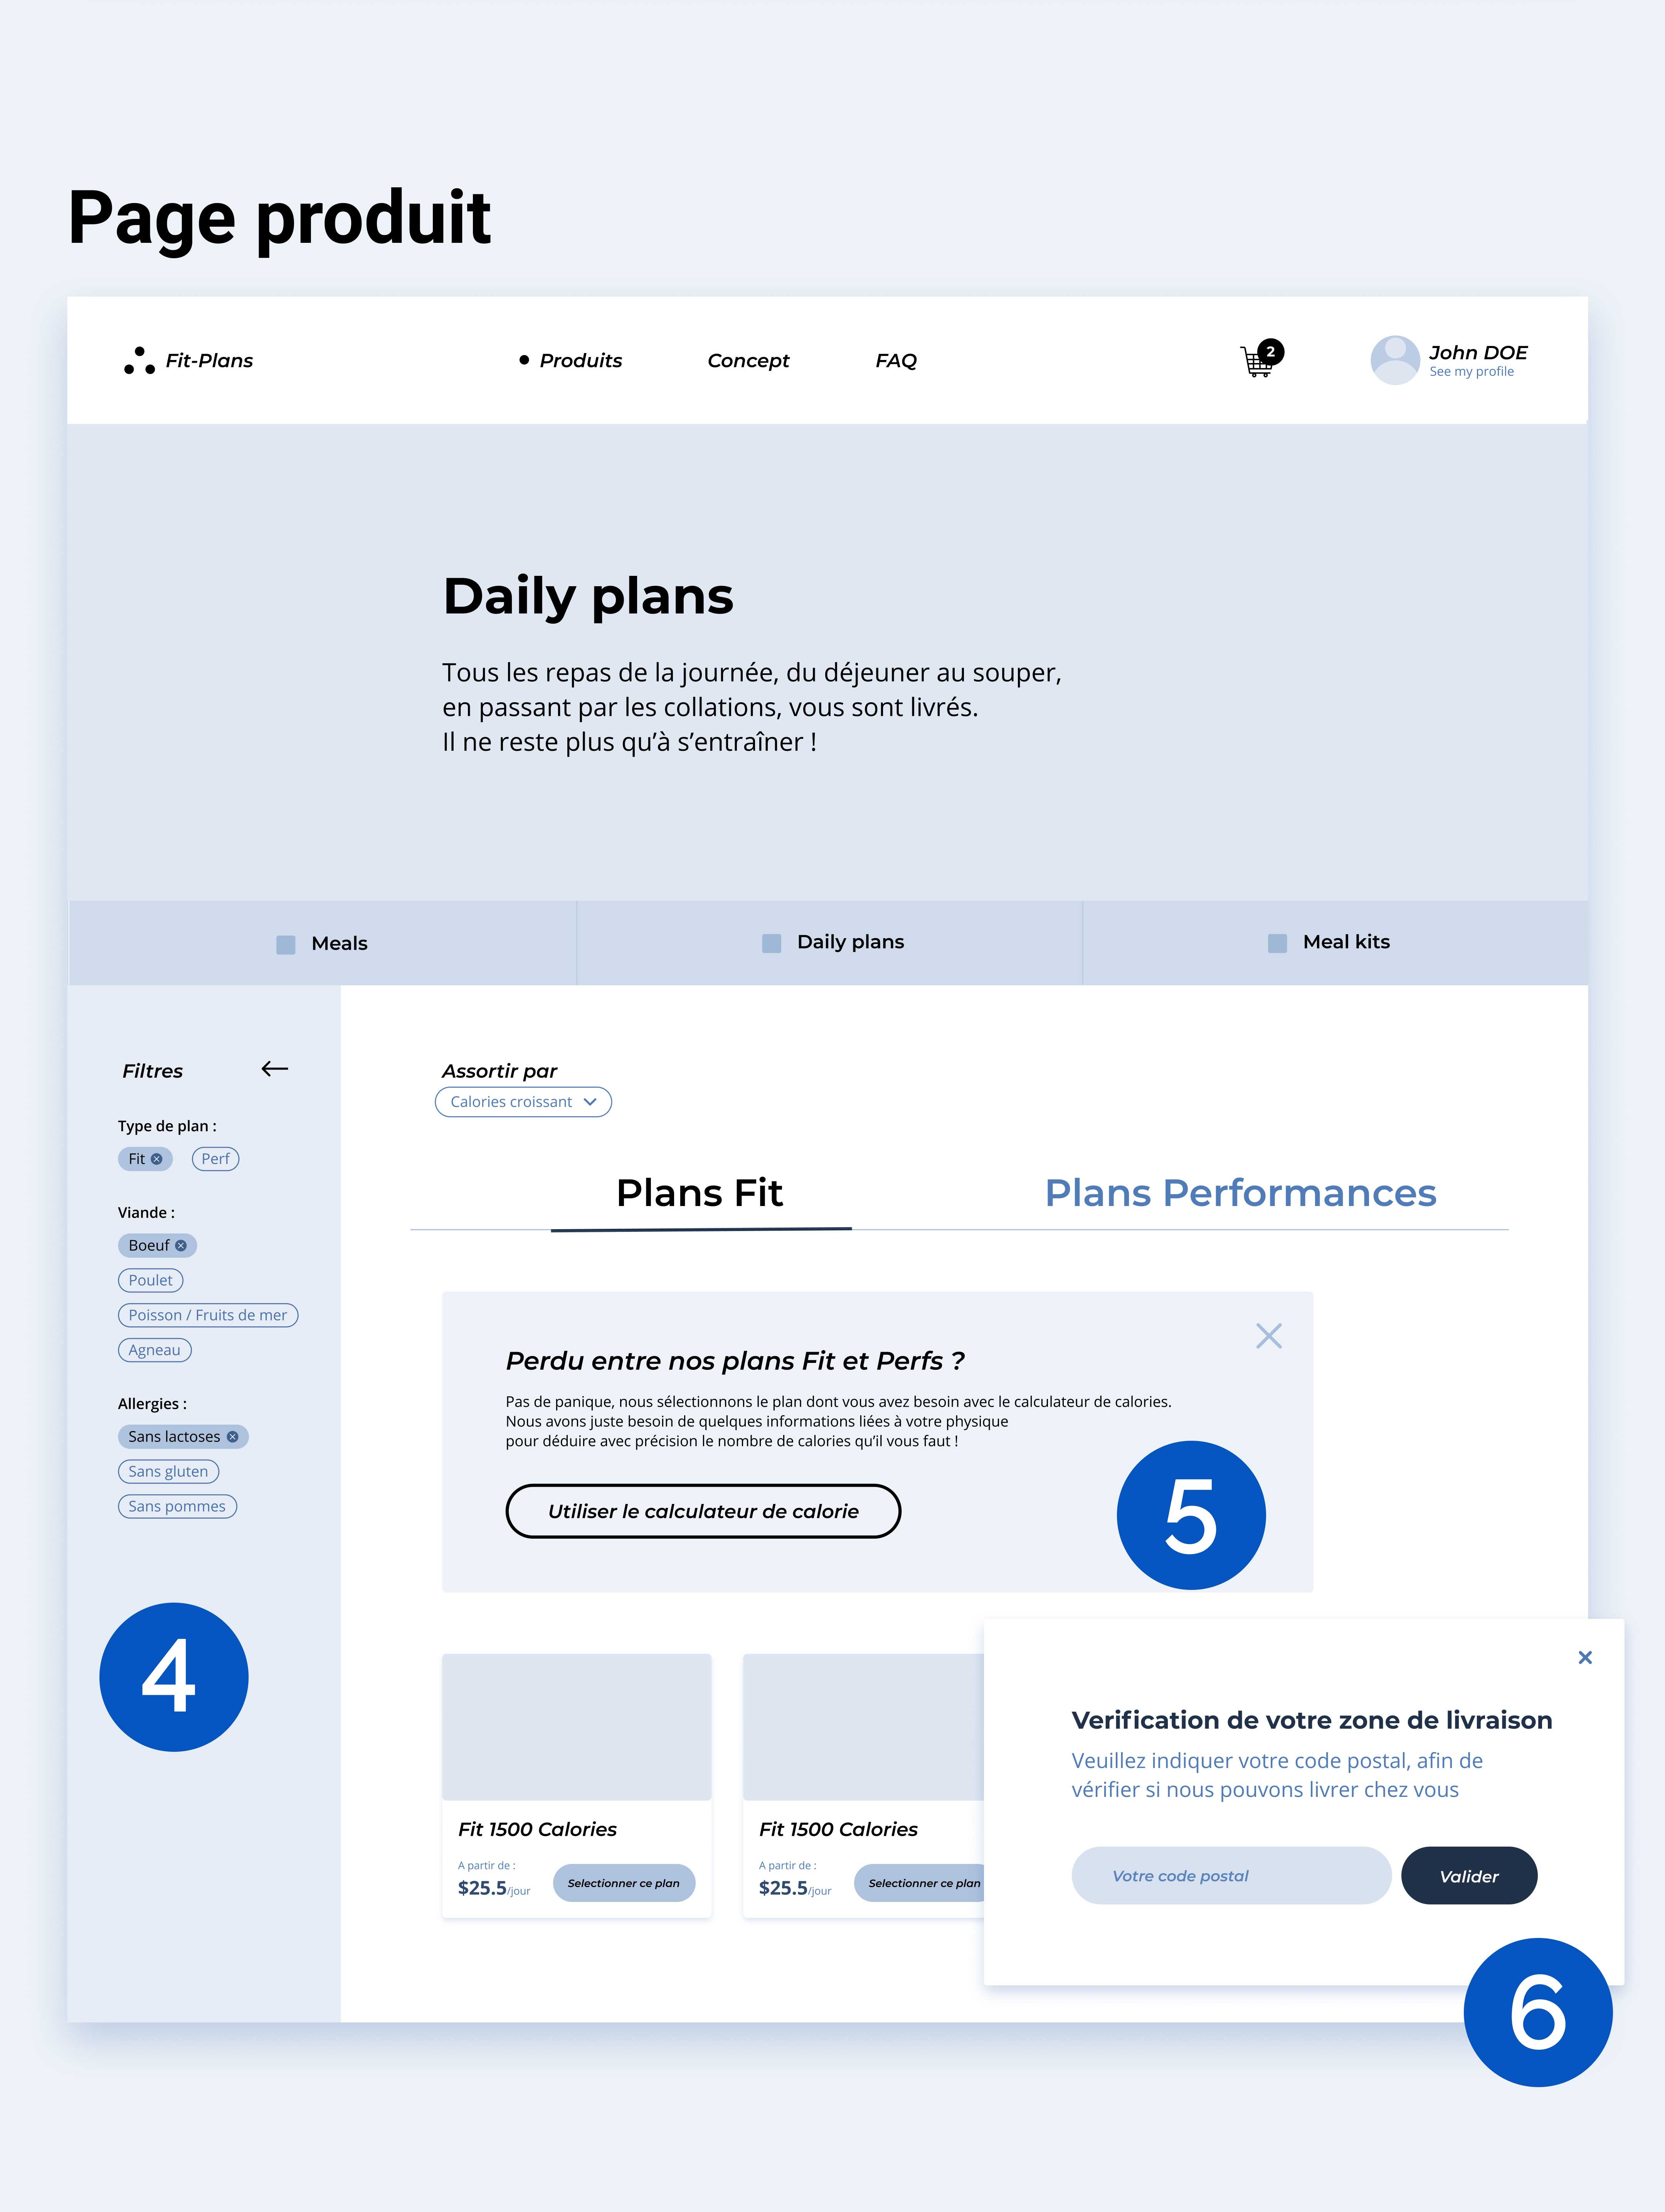 Fit-Plans product page wireframe